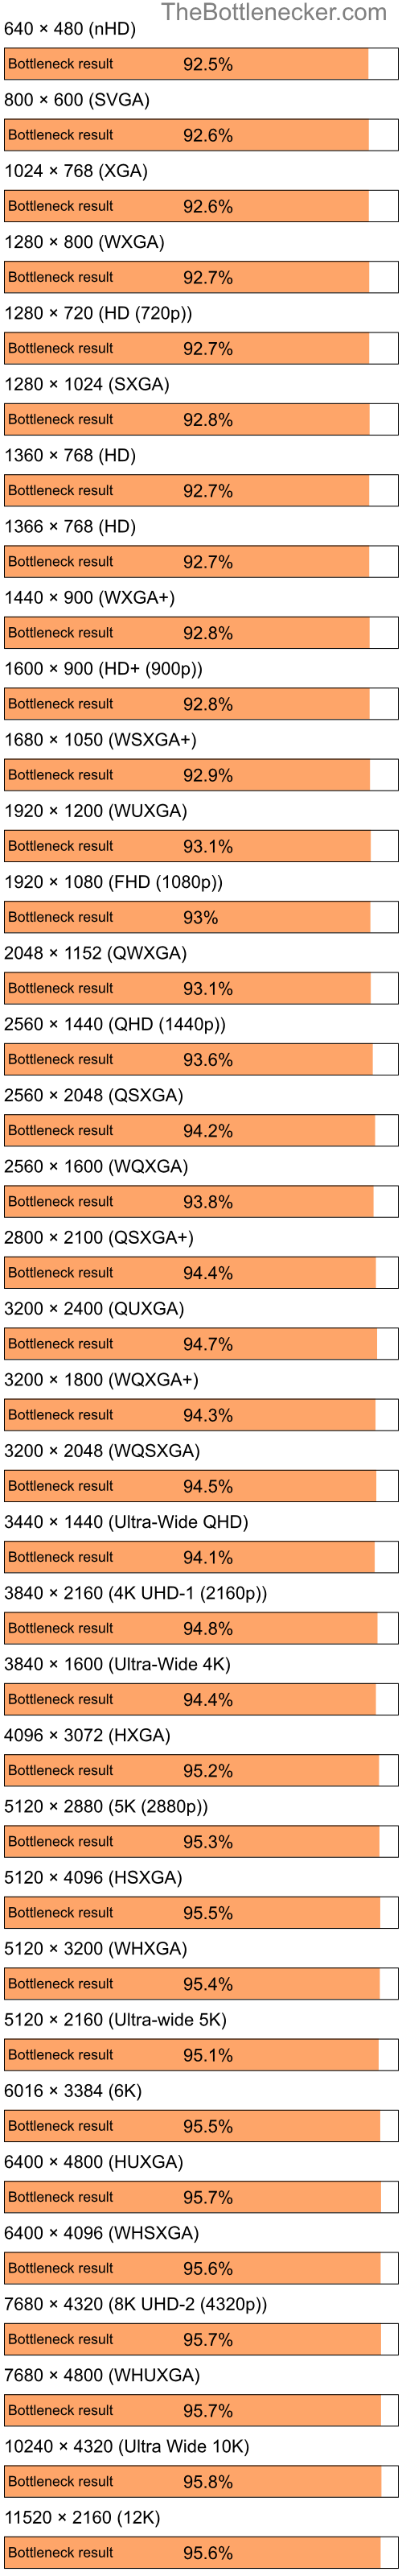 Bottleneck results by resolution for Intel Celeron and AMD Mobility Radeon 9200 in Graphic Card Intense Tasks